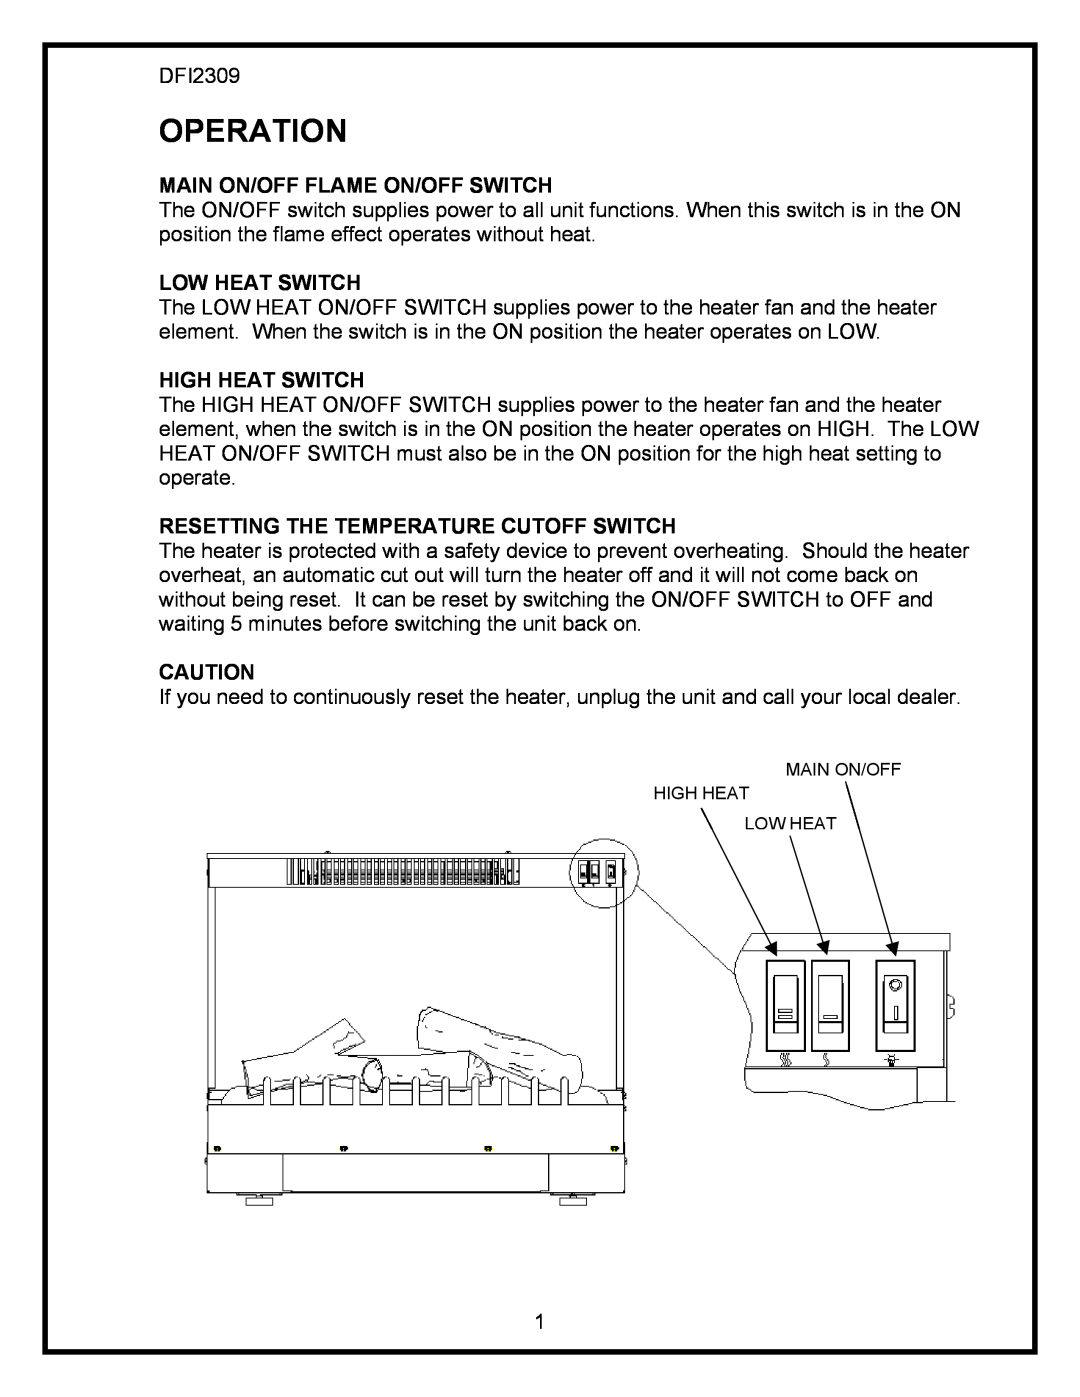 Dimplex DFI2309 service manual Operation, Main On/Off Flame On/Off Switch, Low Heat Switch, High Heat Switch 